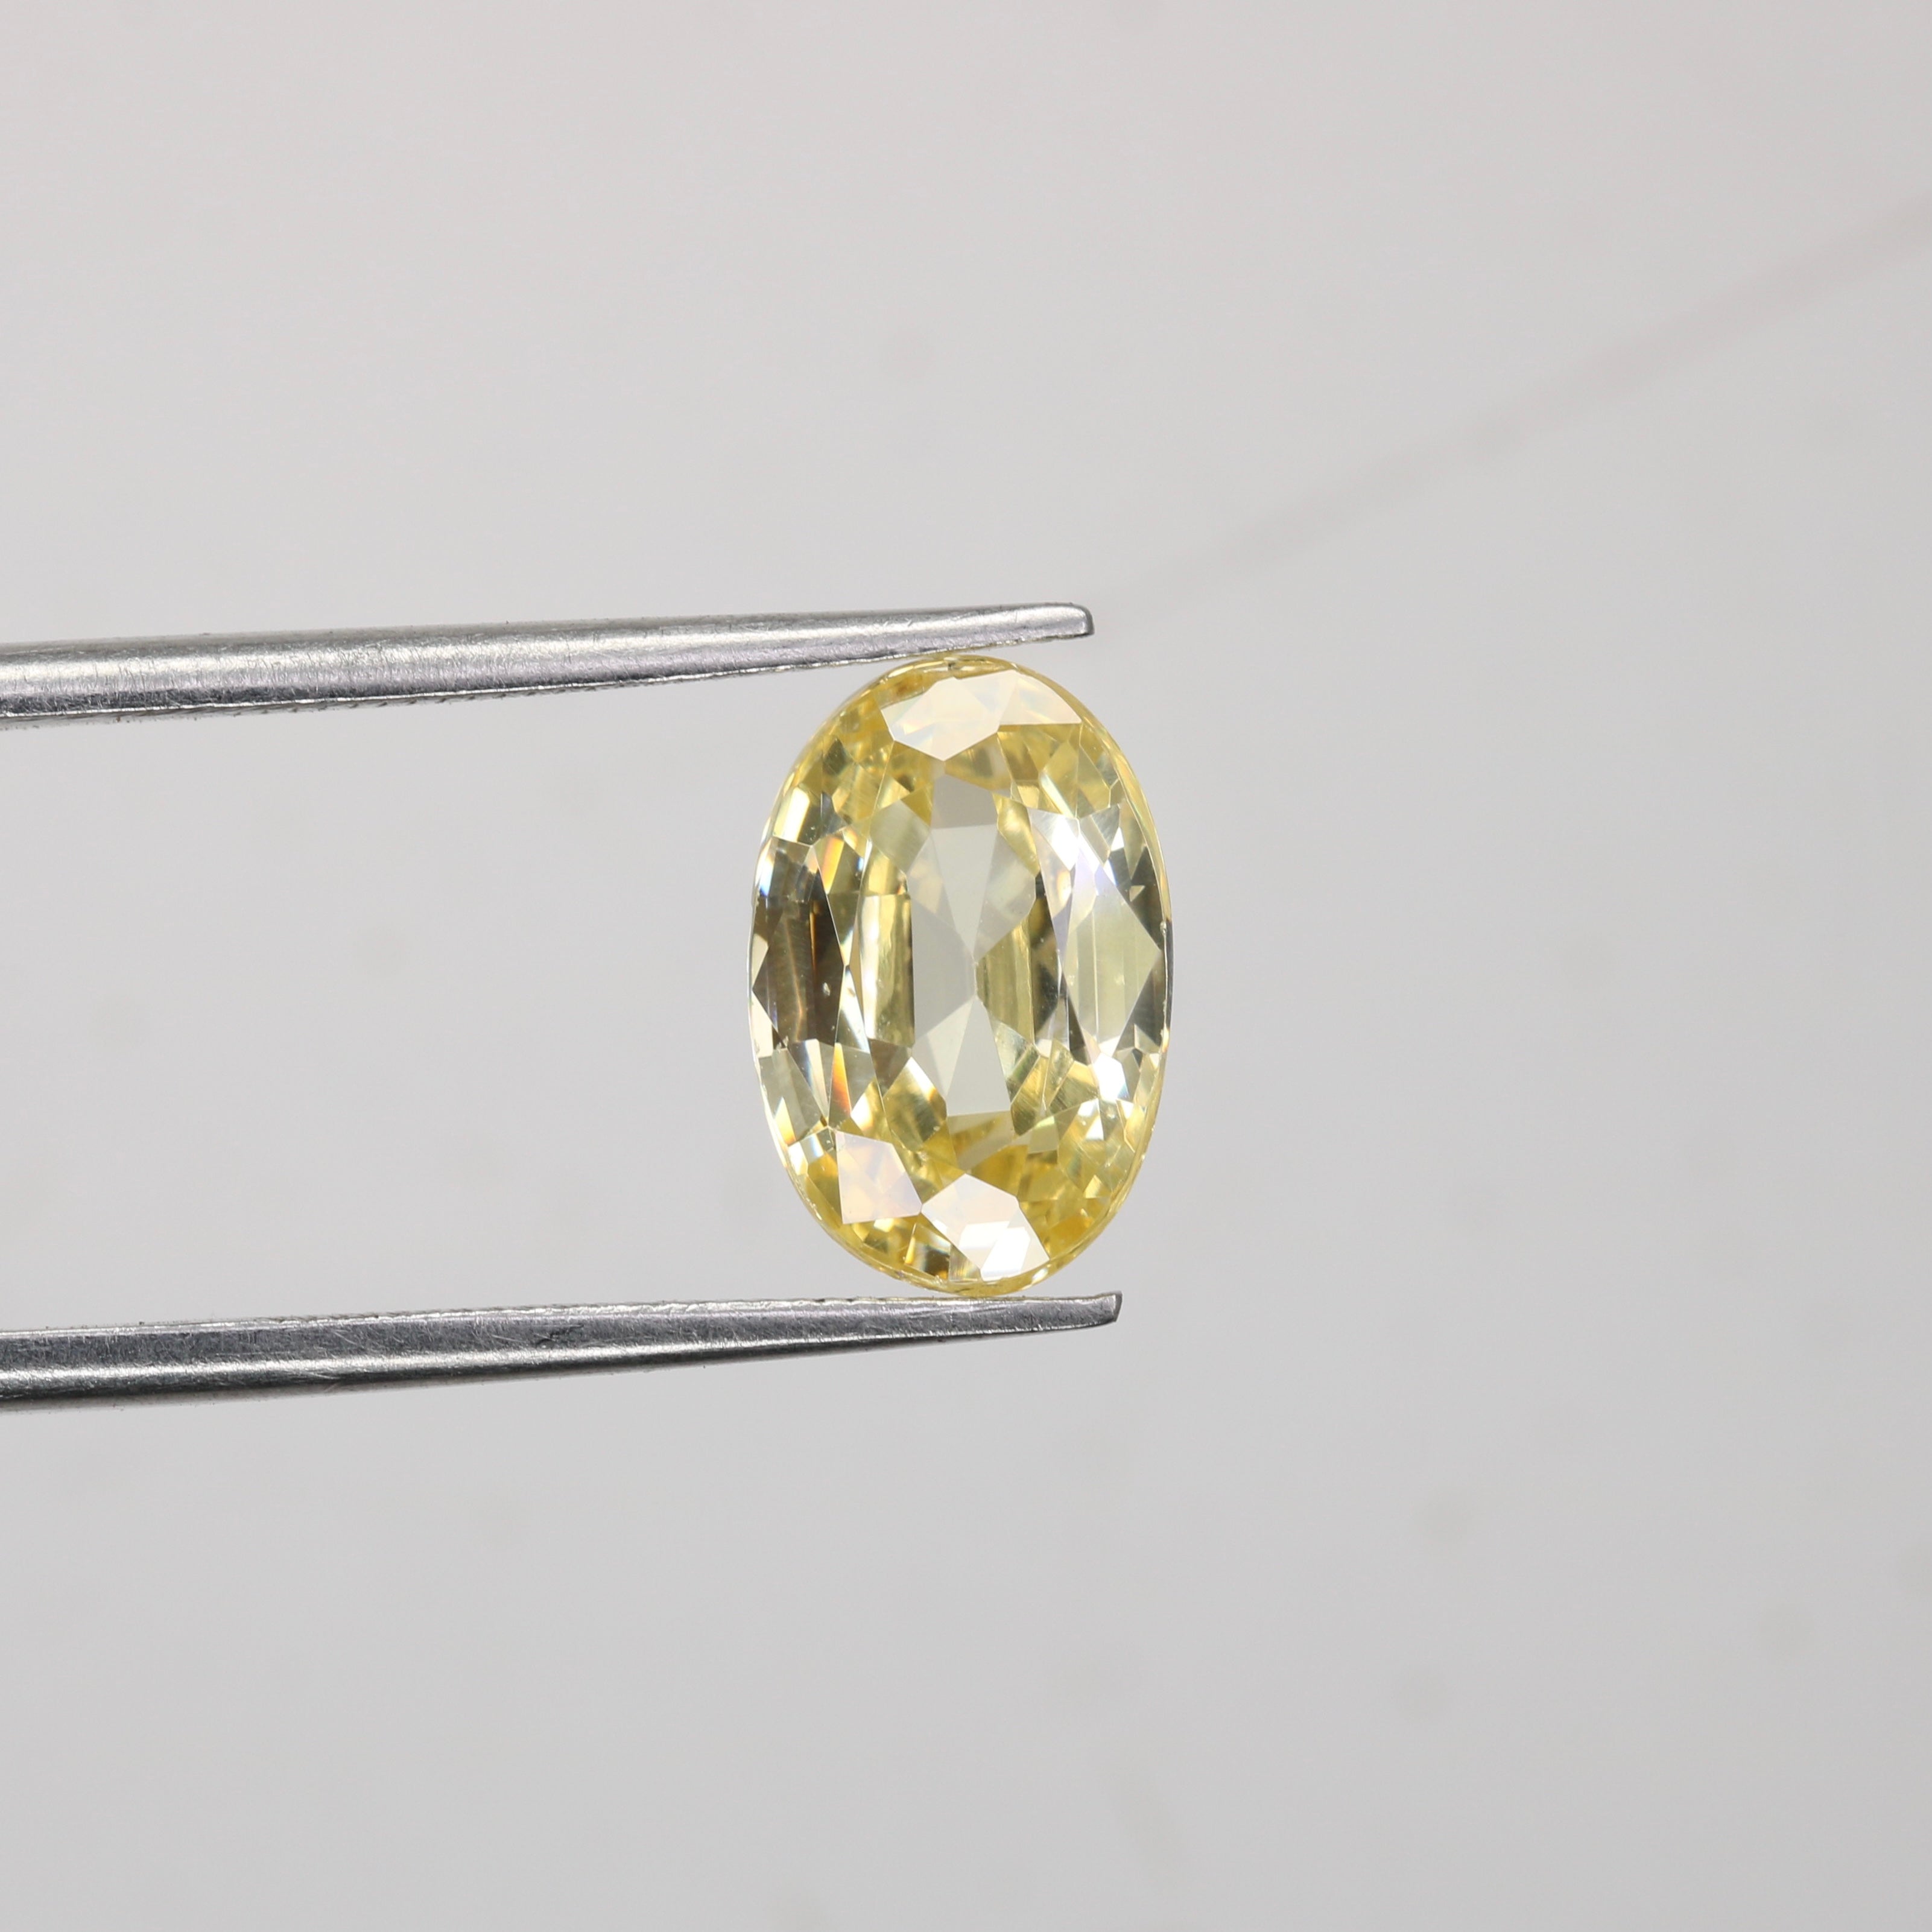 5.54 CT 7.10 MM Oval Shape Yellow Citrine Loose Gemstone For Wedding Ring